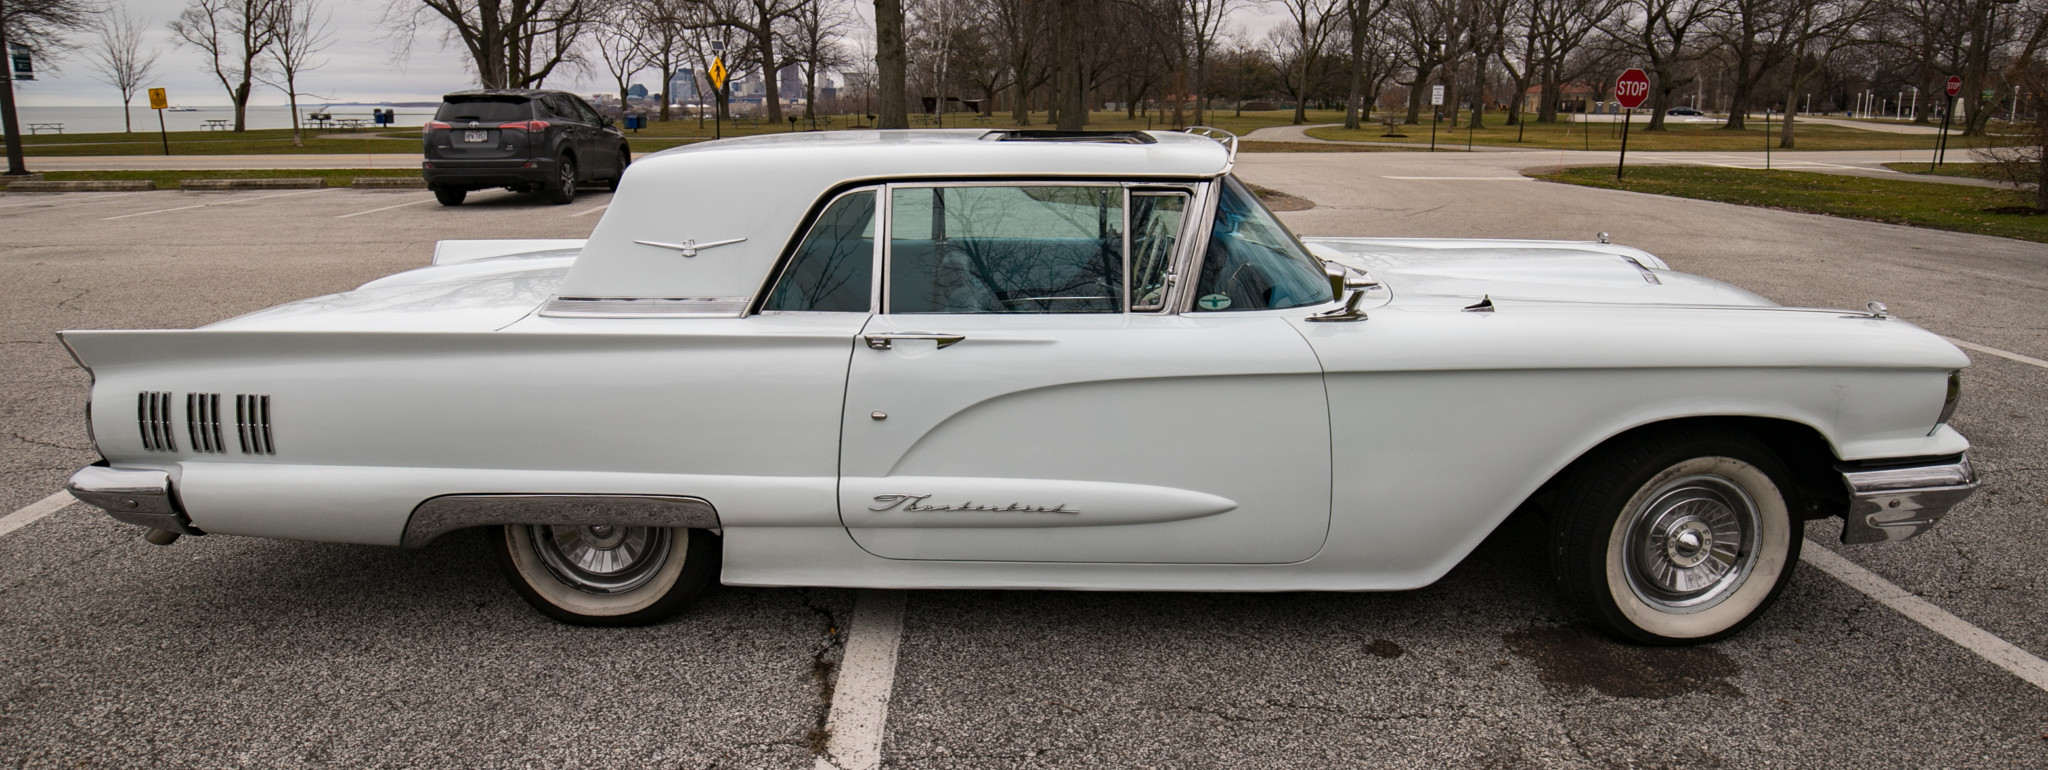 1960 Ford Thunderbird Side View